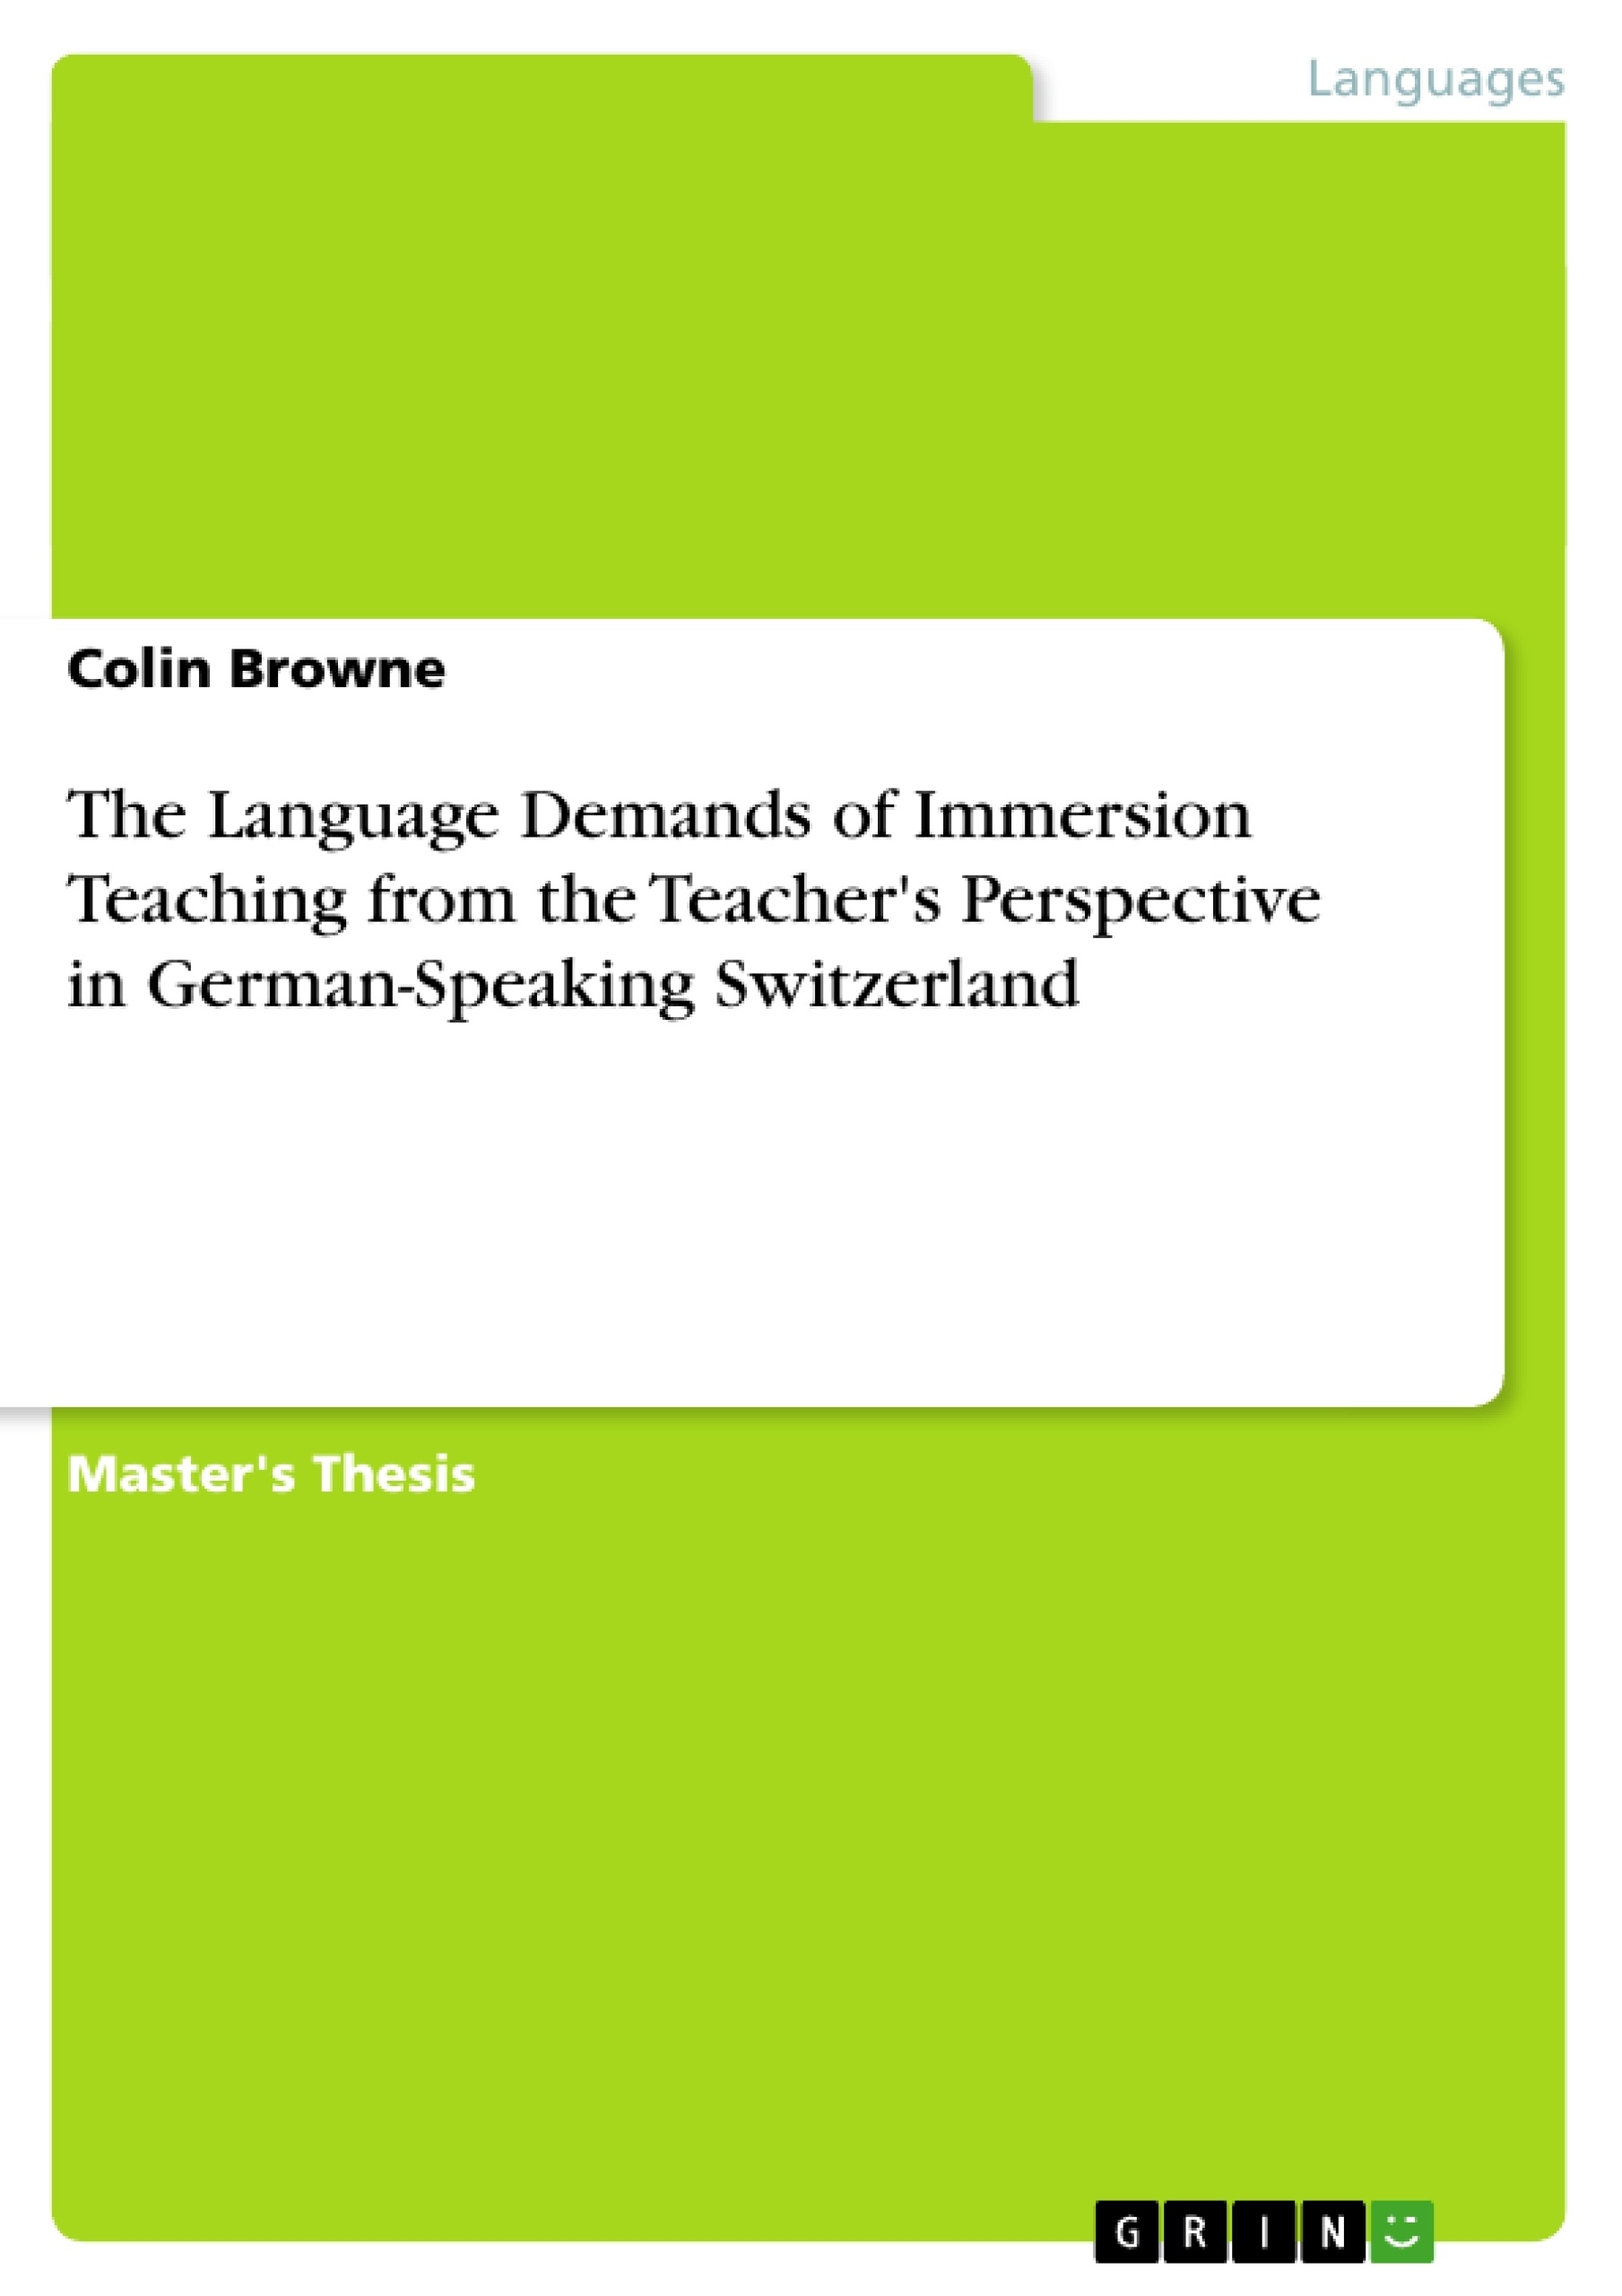 Title: The Language Demands of Immersion Teaching from the Teacher's Perspective in German-Speaking Switzerland